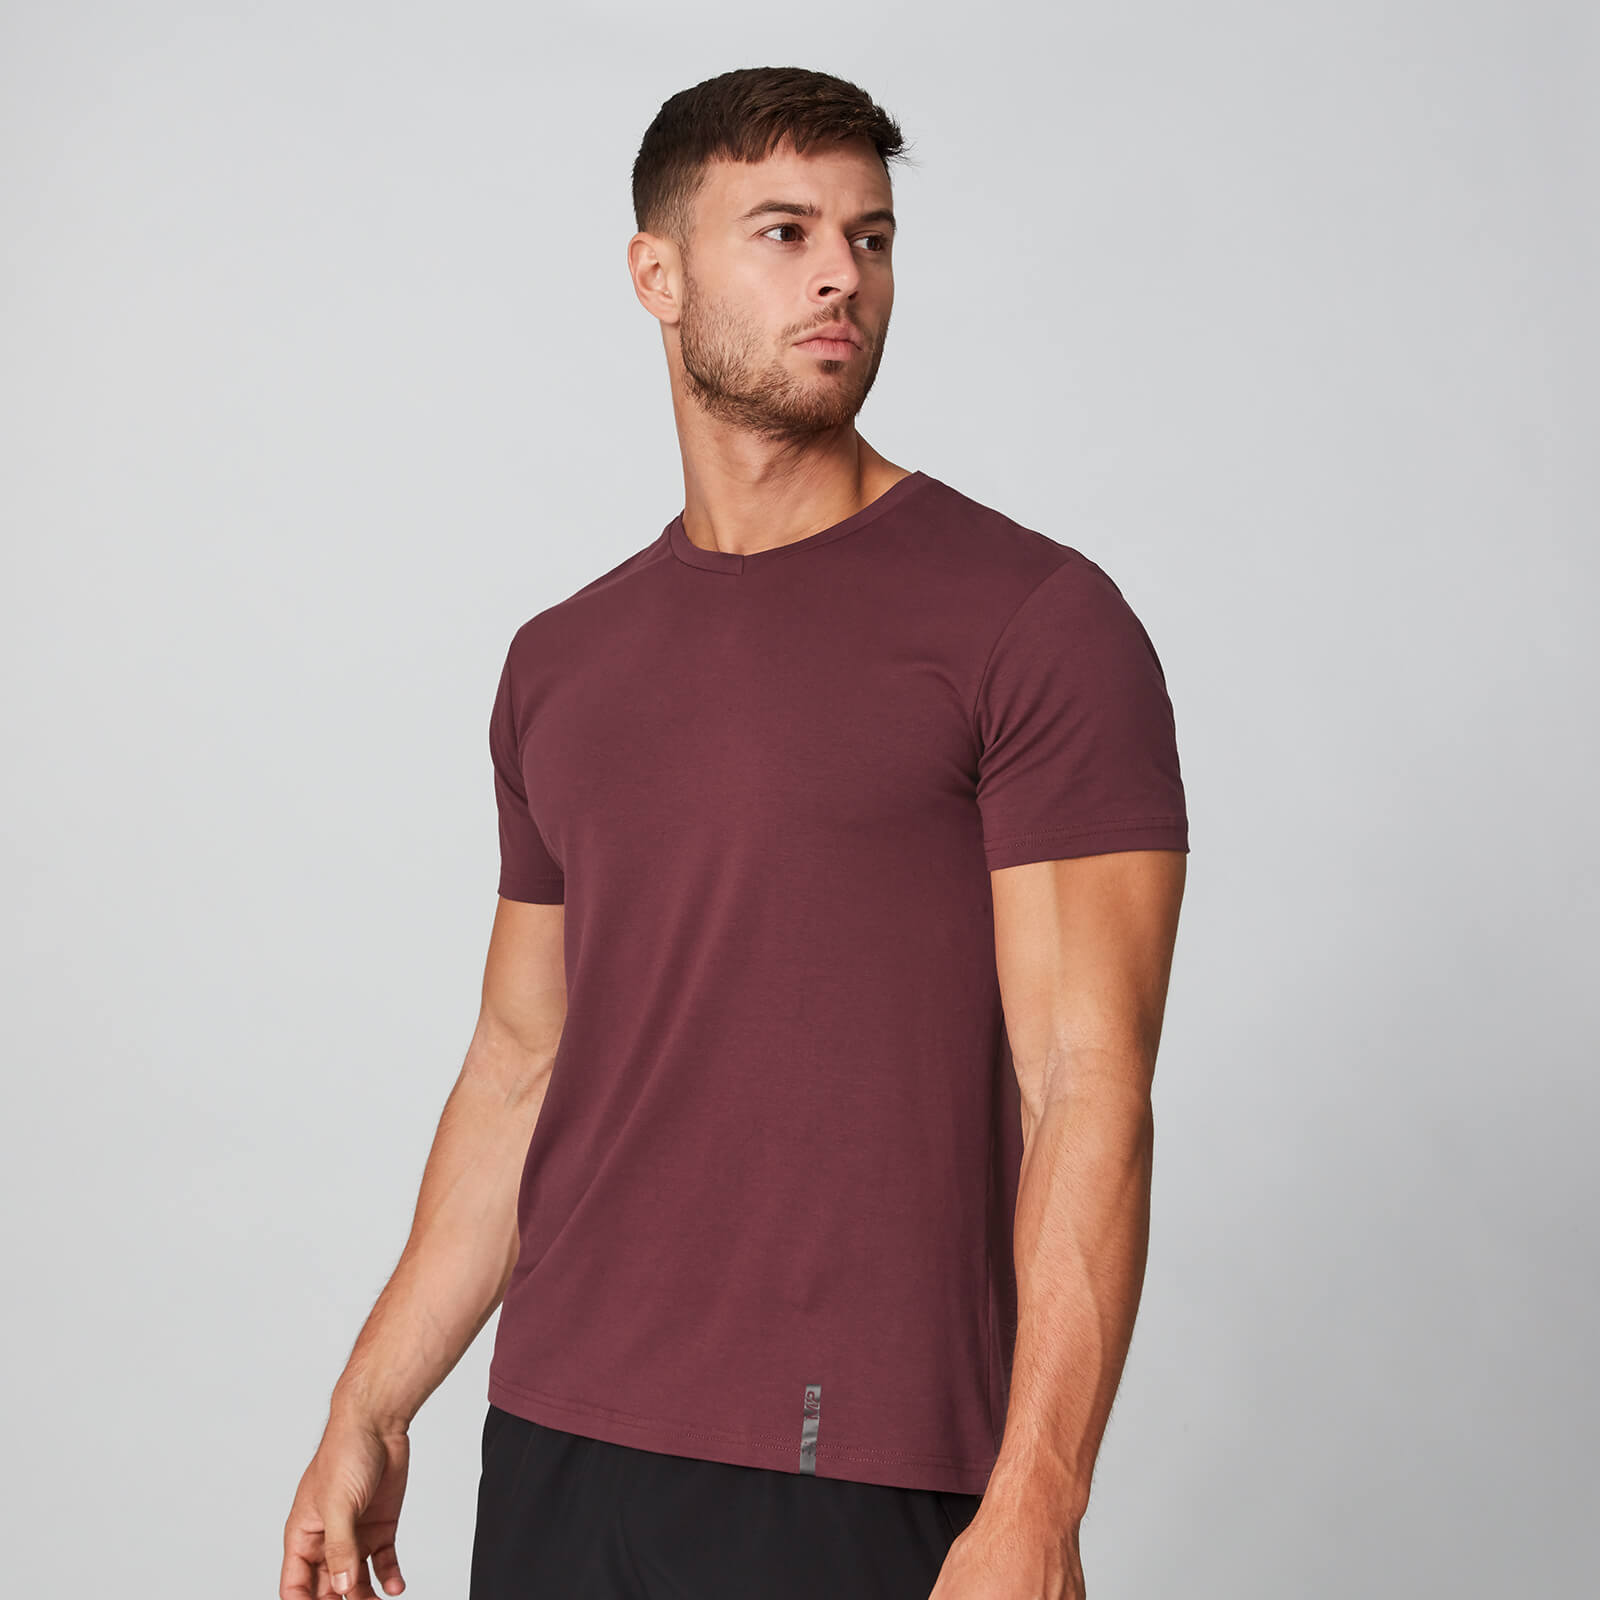 Myprotein Luxe Classic V-Neck - Oxblood - S